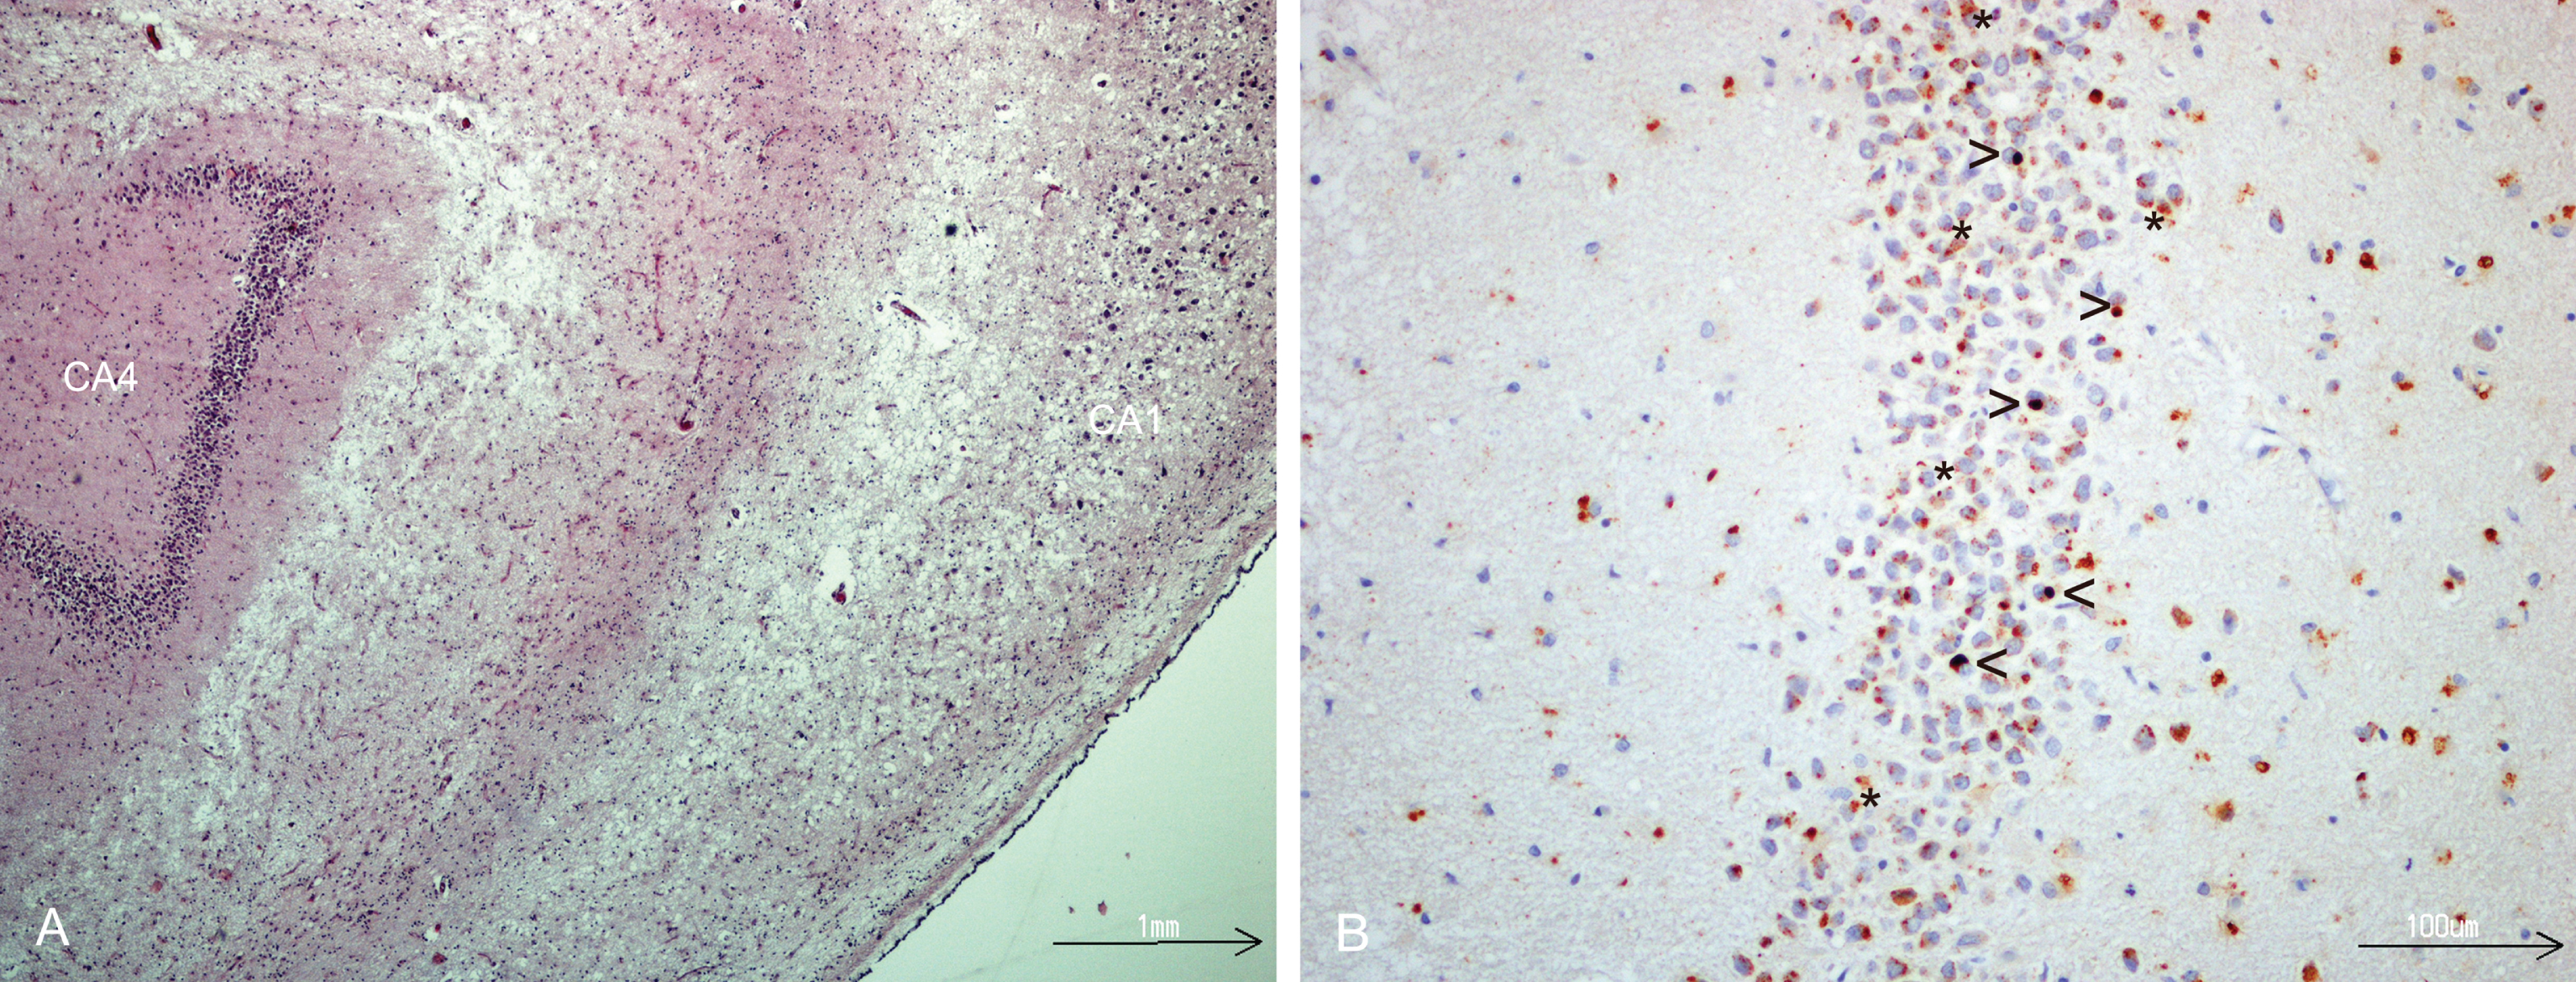 A) Hippocampal sclerosis, severe neuronal loss in CA1 sector, HE- stained. B) TDP-43 immunostaining of dentate fascia granule cells showing NCIs, (open arrow head), dark brown. Lipofuscin (star) is seen as yellowish granular deposits.